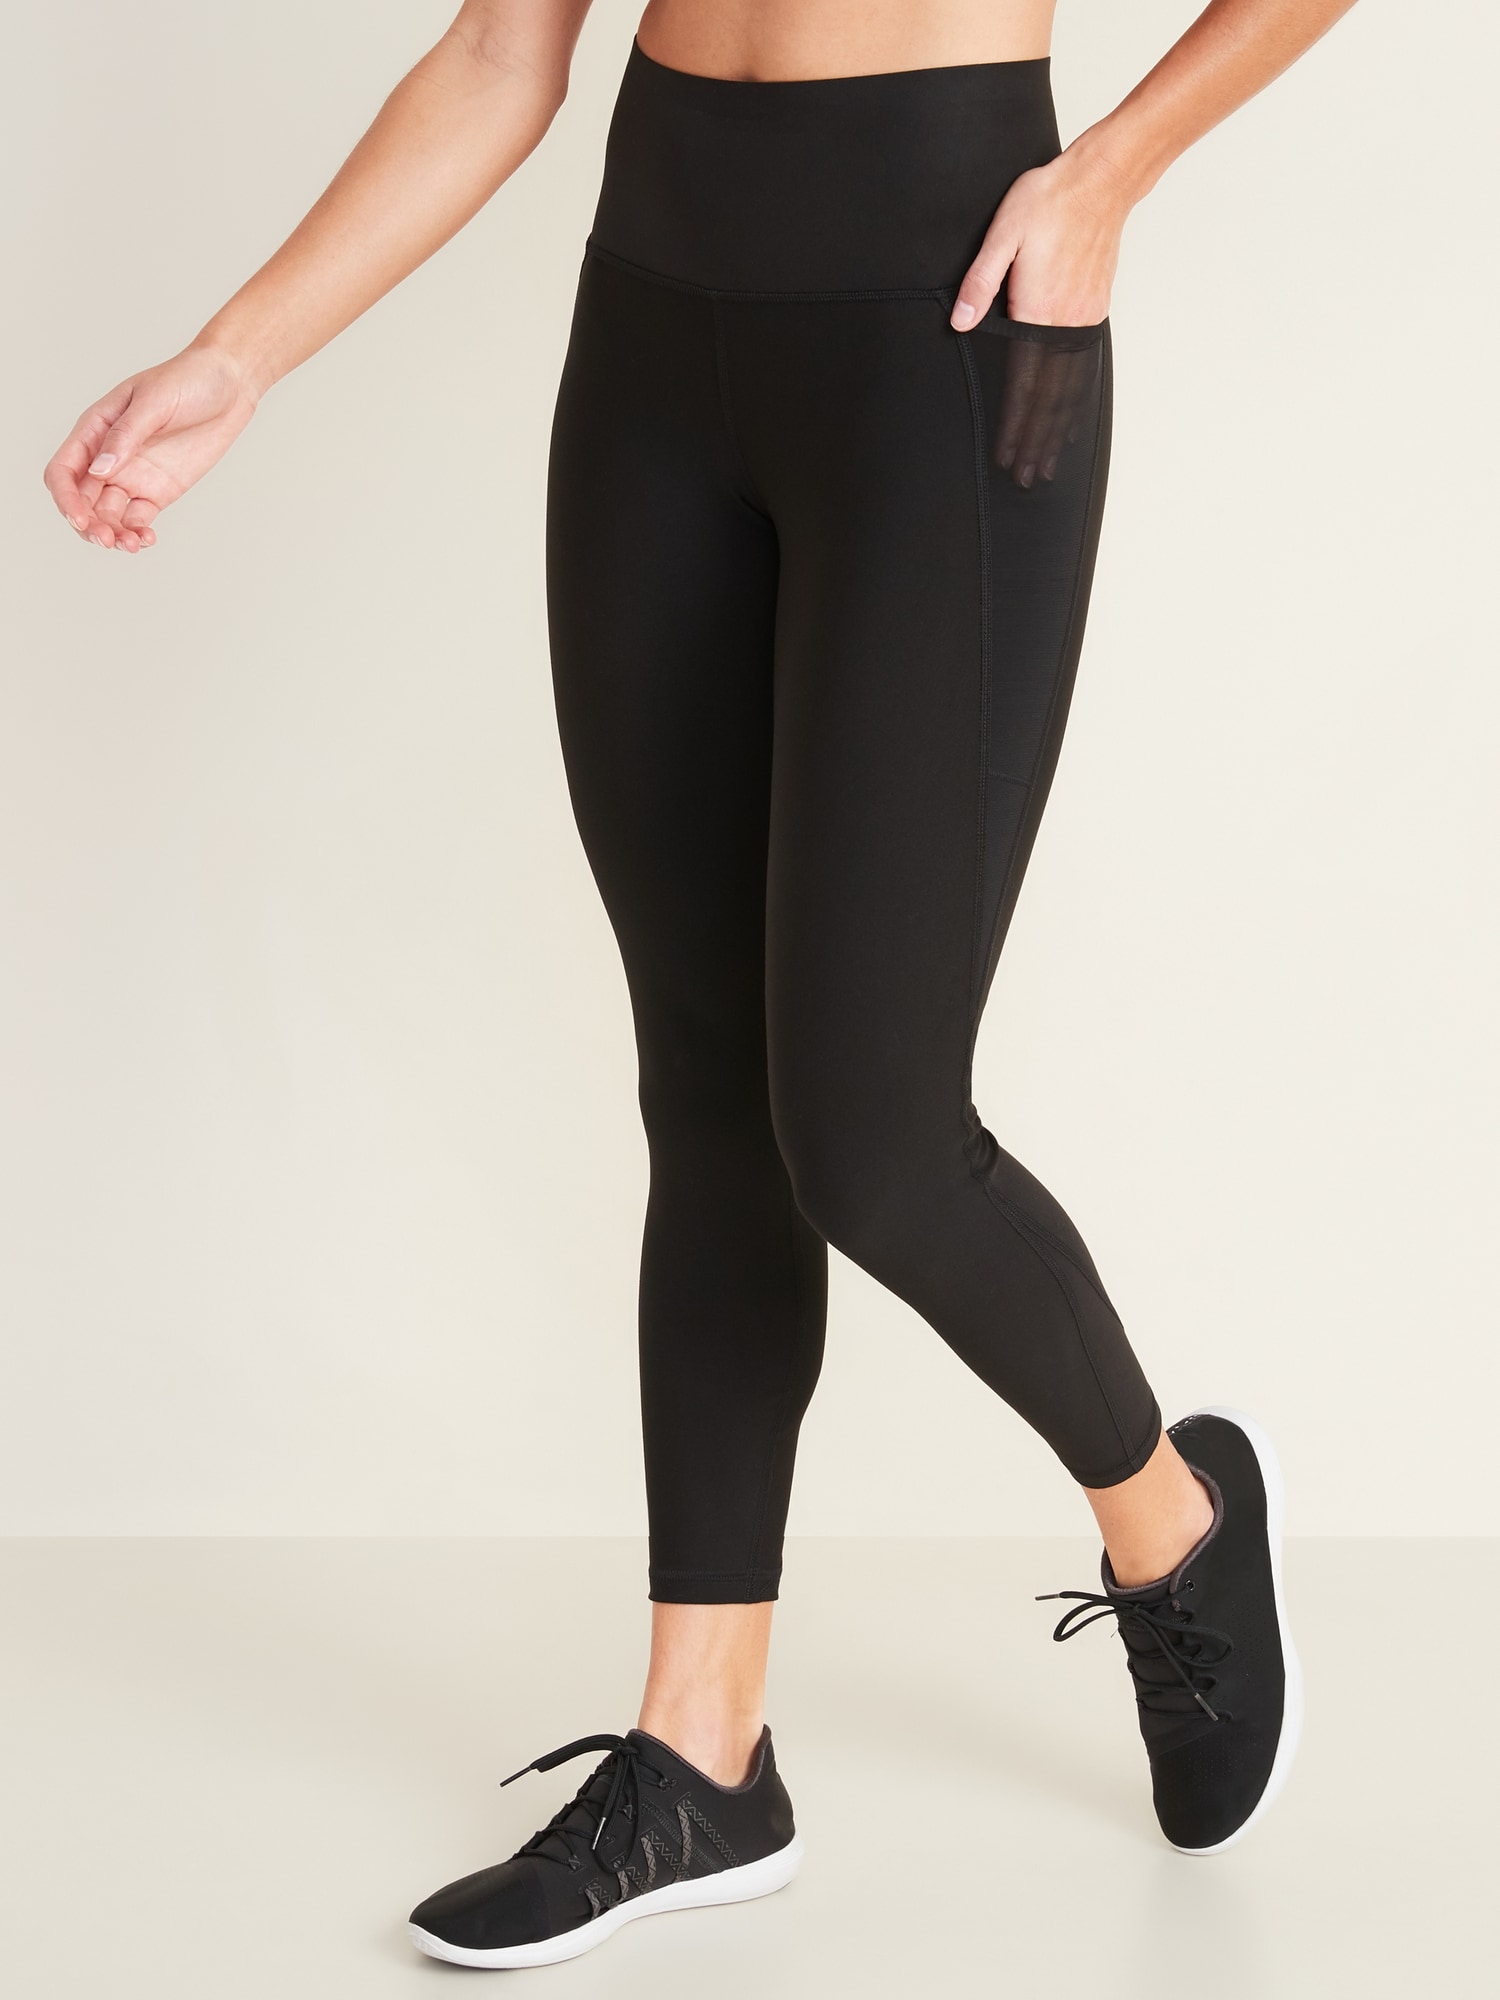 Old Navy Active Go Dry Black Leggings Size M - $15 - From christina